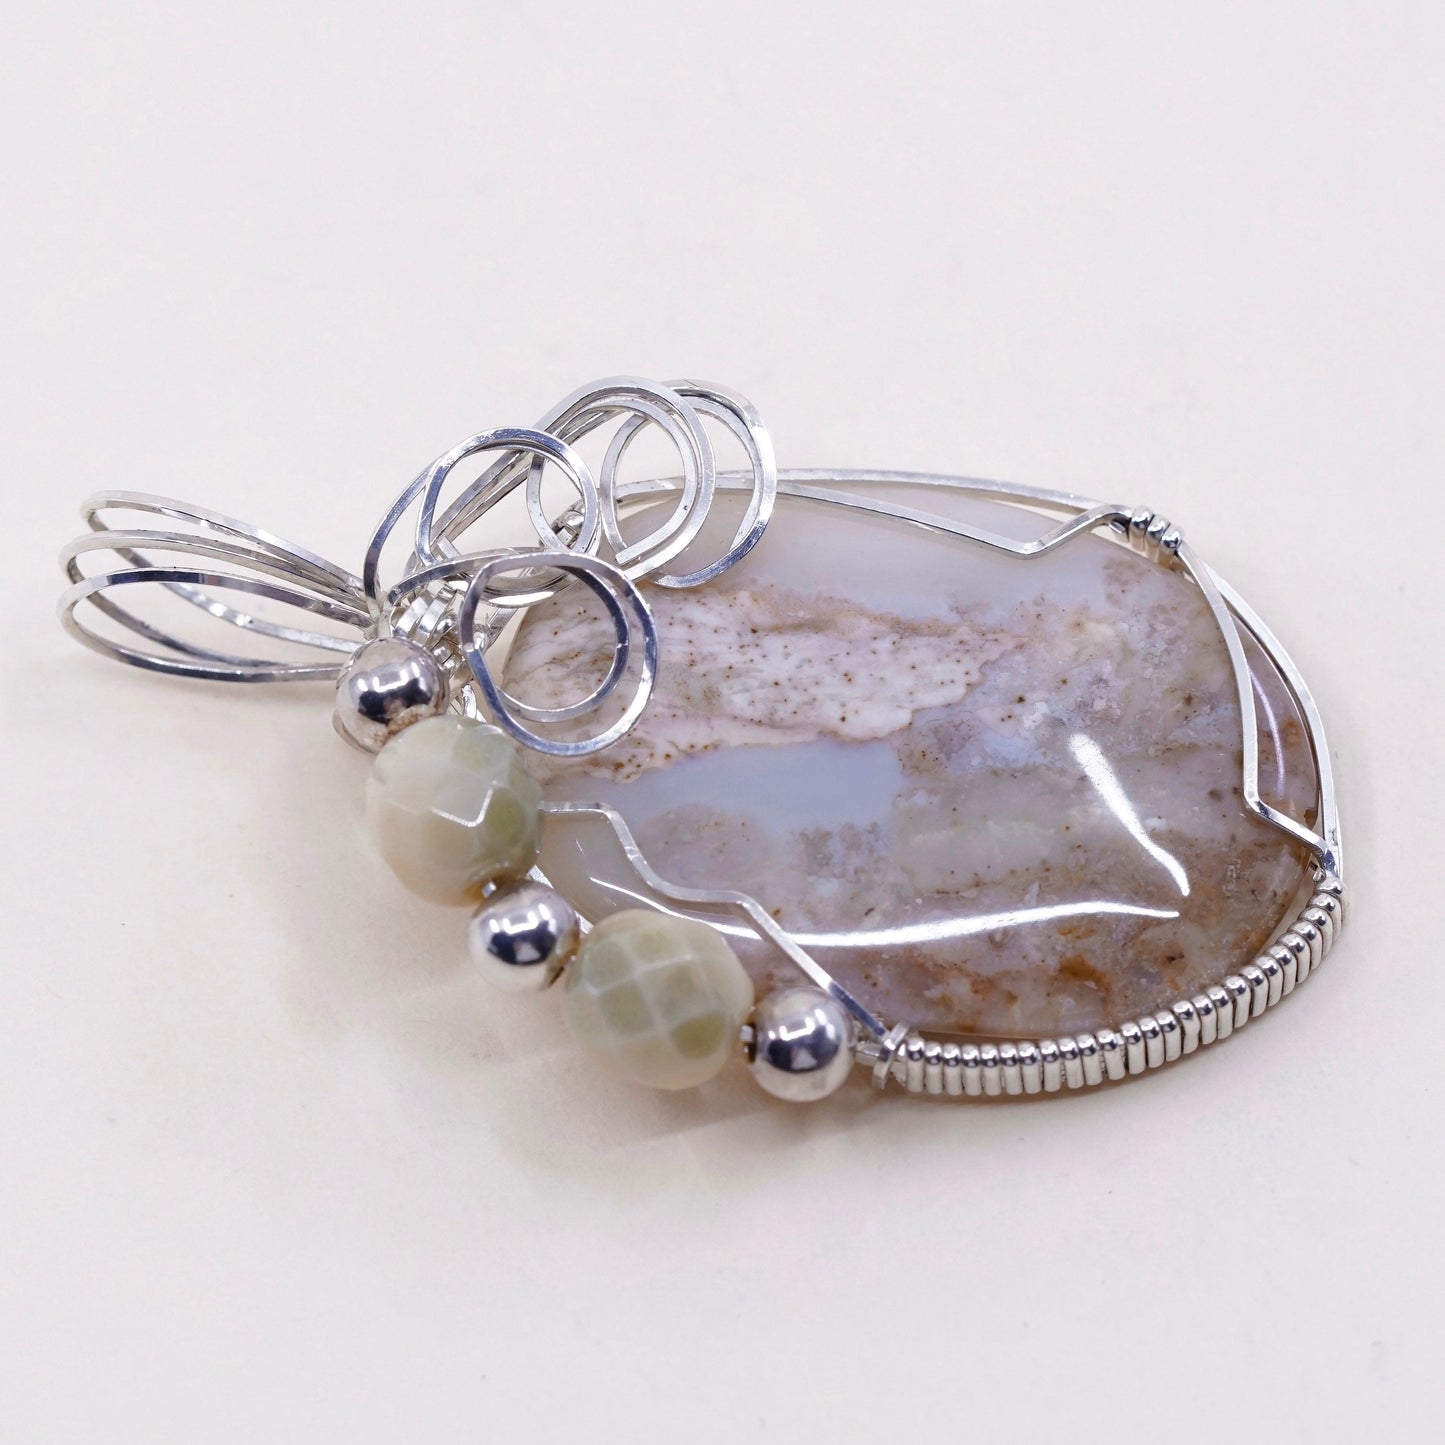 vtg southwestern sterling silver handmade pendant, 925 with crazy lace agate